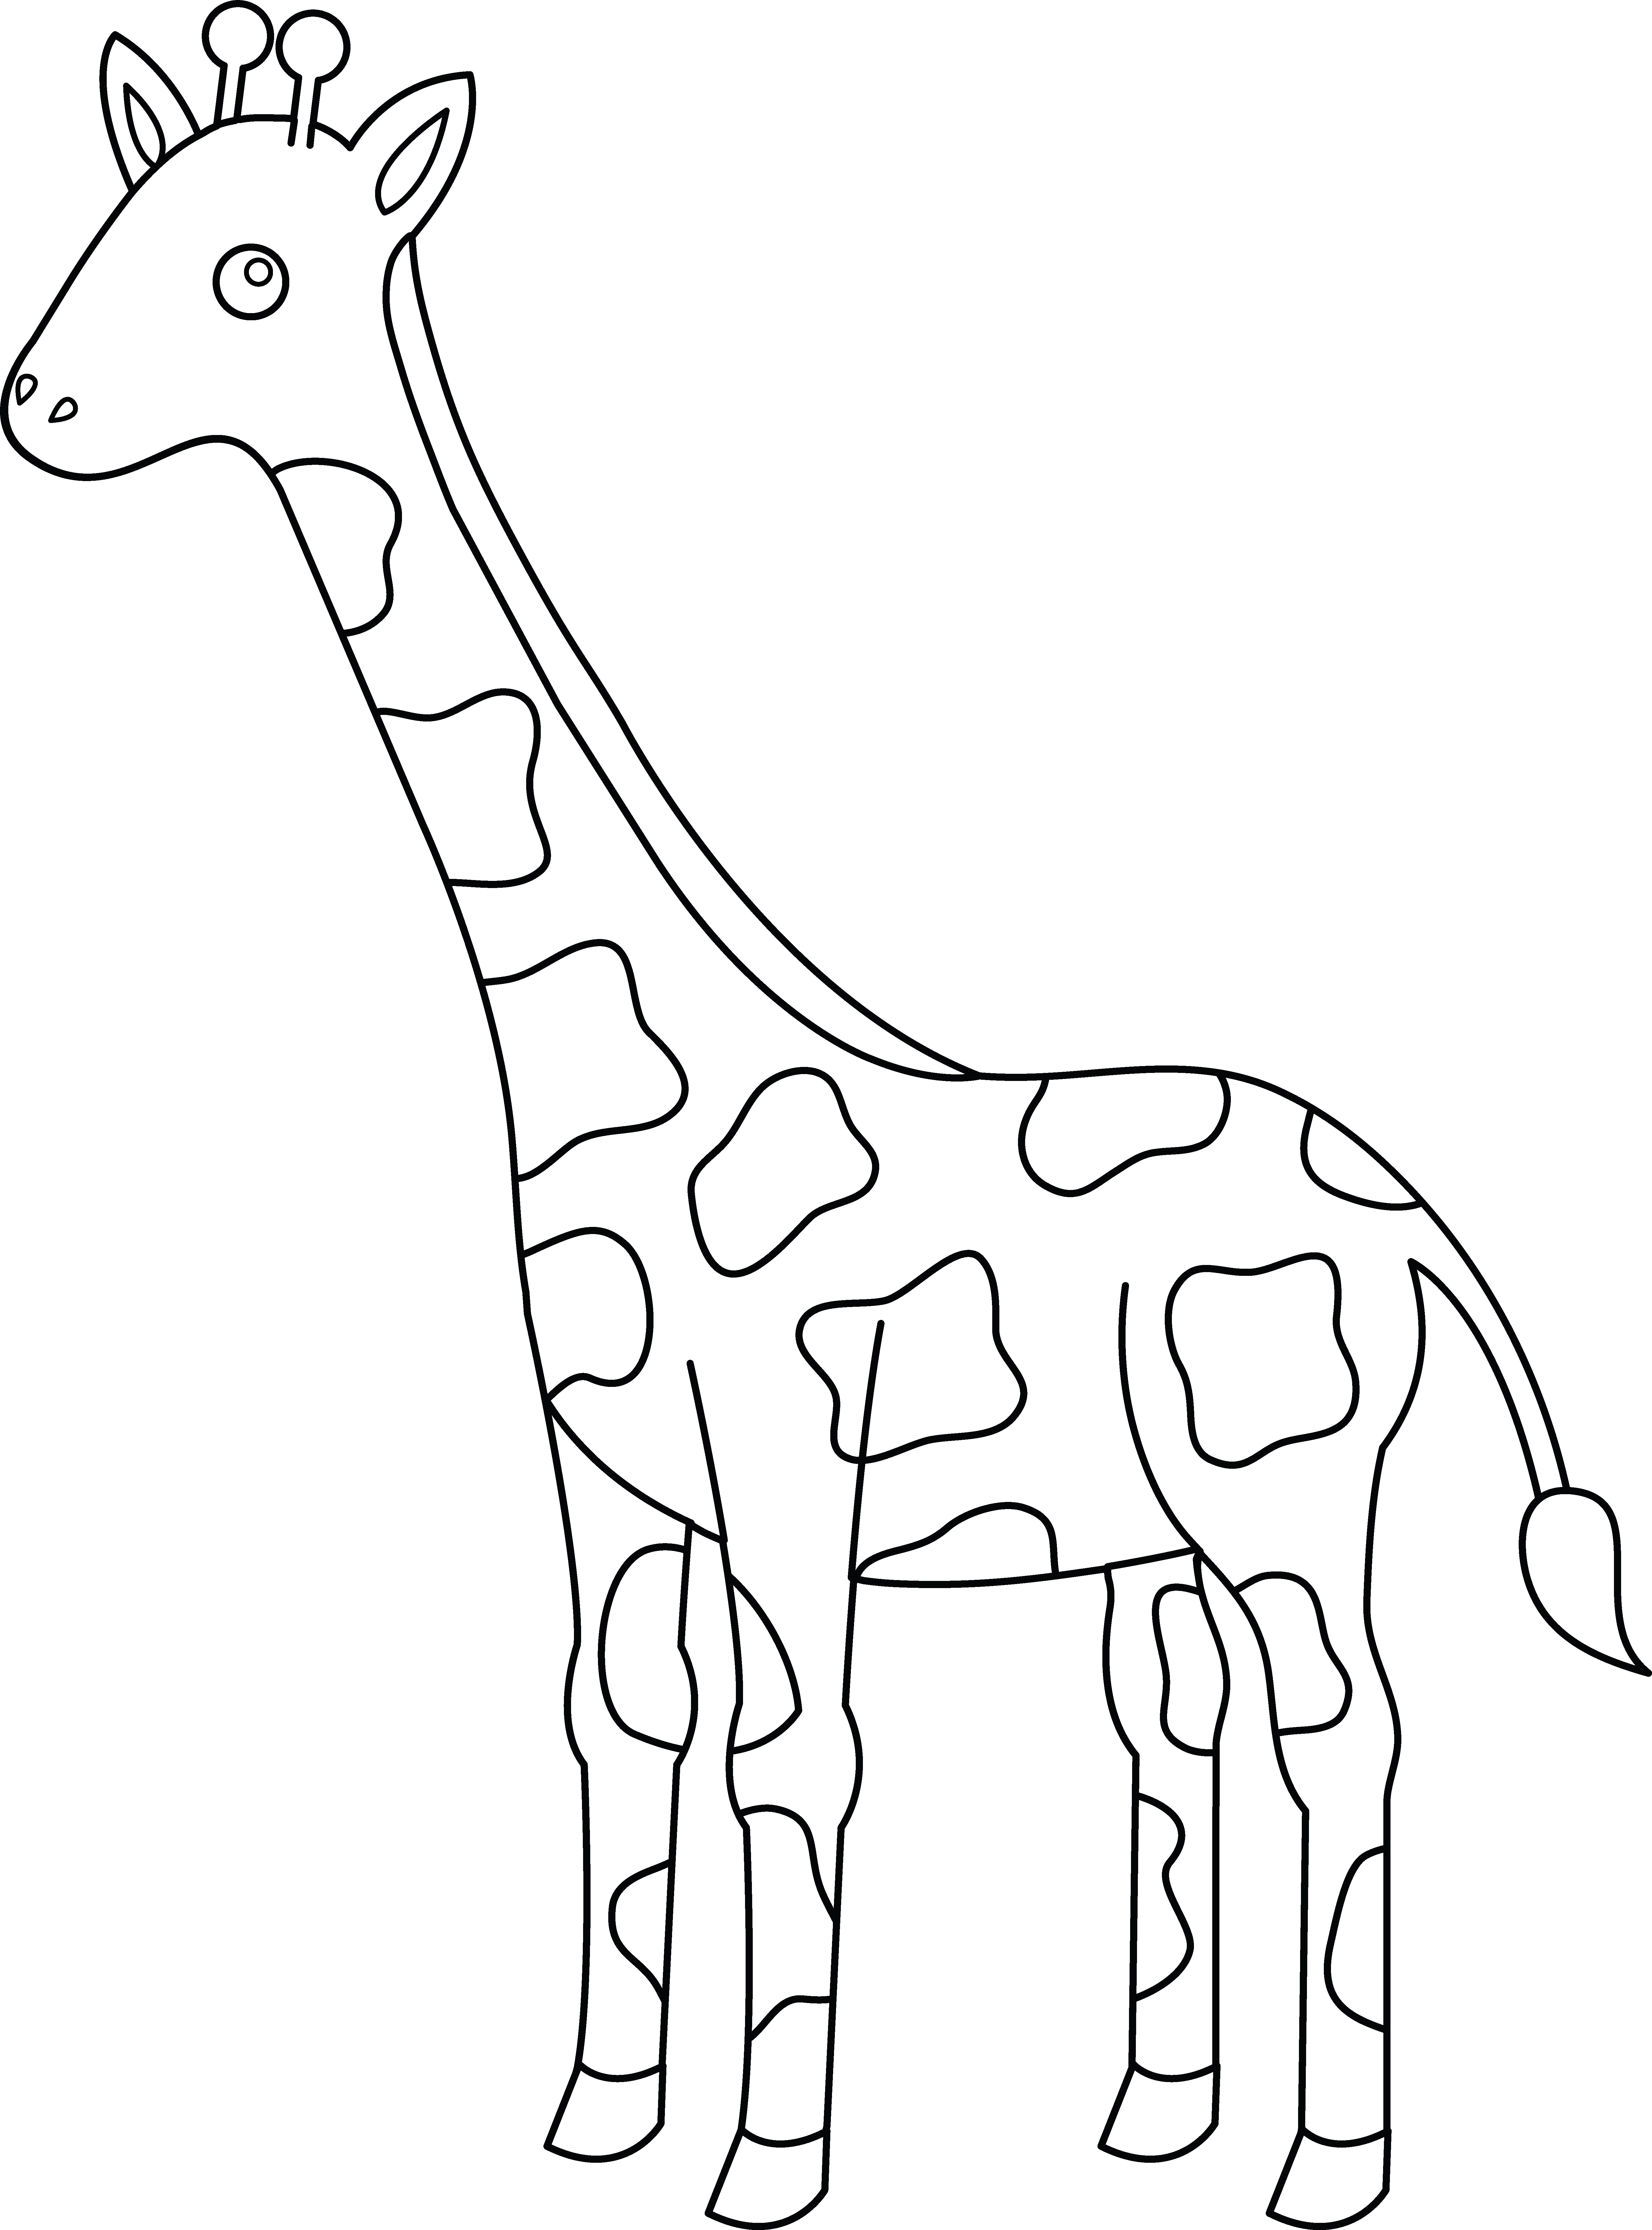 giraffe-cartoon-coloring-pages 